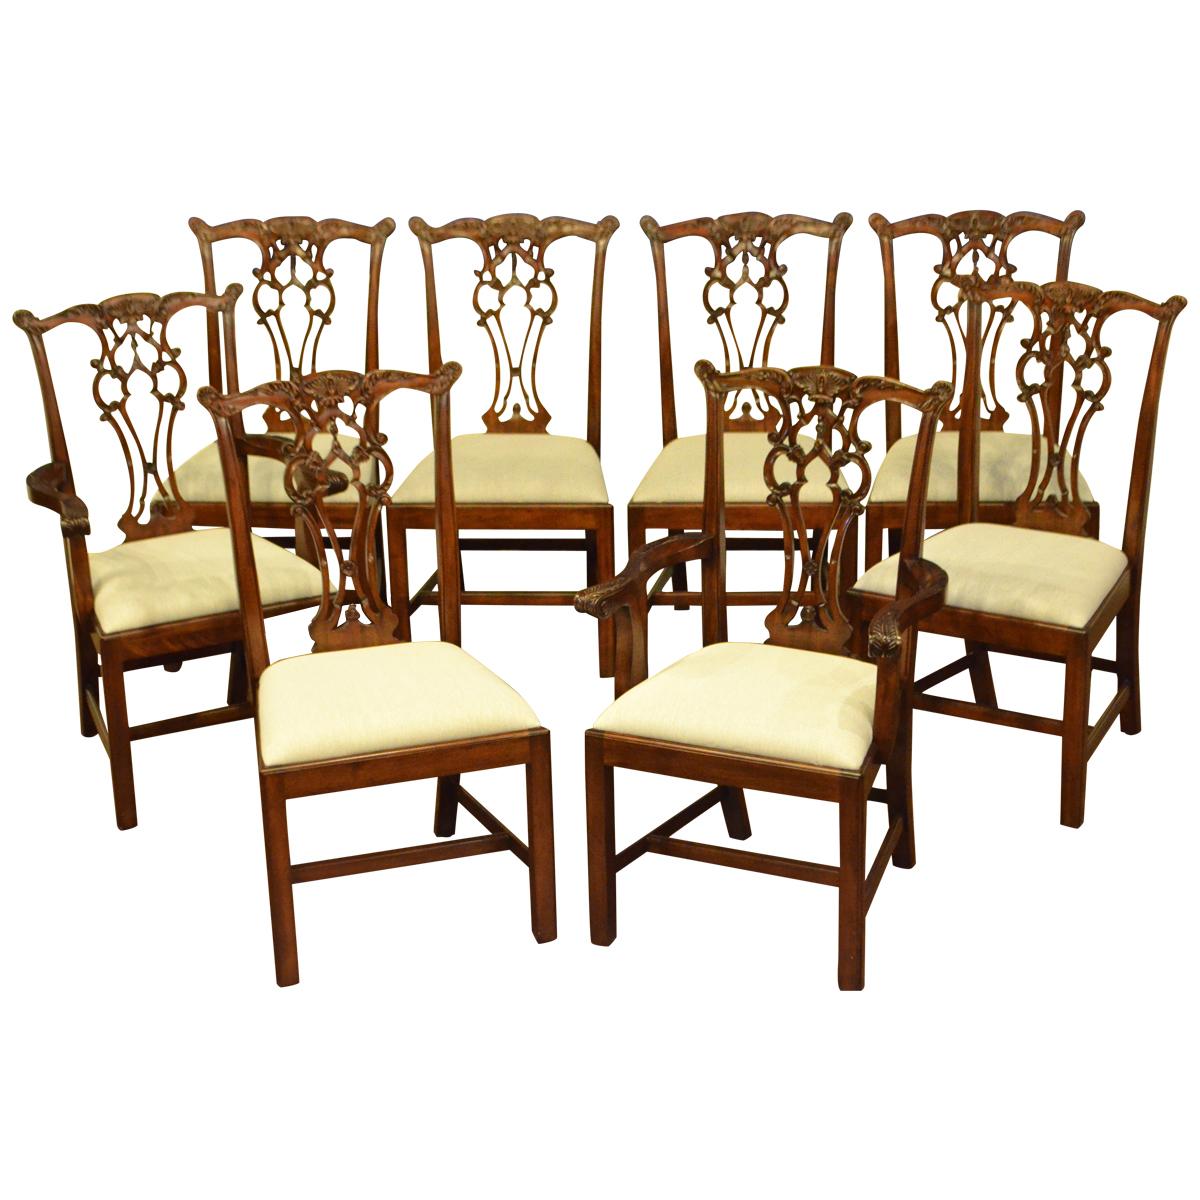 Eight New Mahogany Chippendale Style Straight Leg Dining Chairs by Leighton Hall